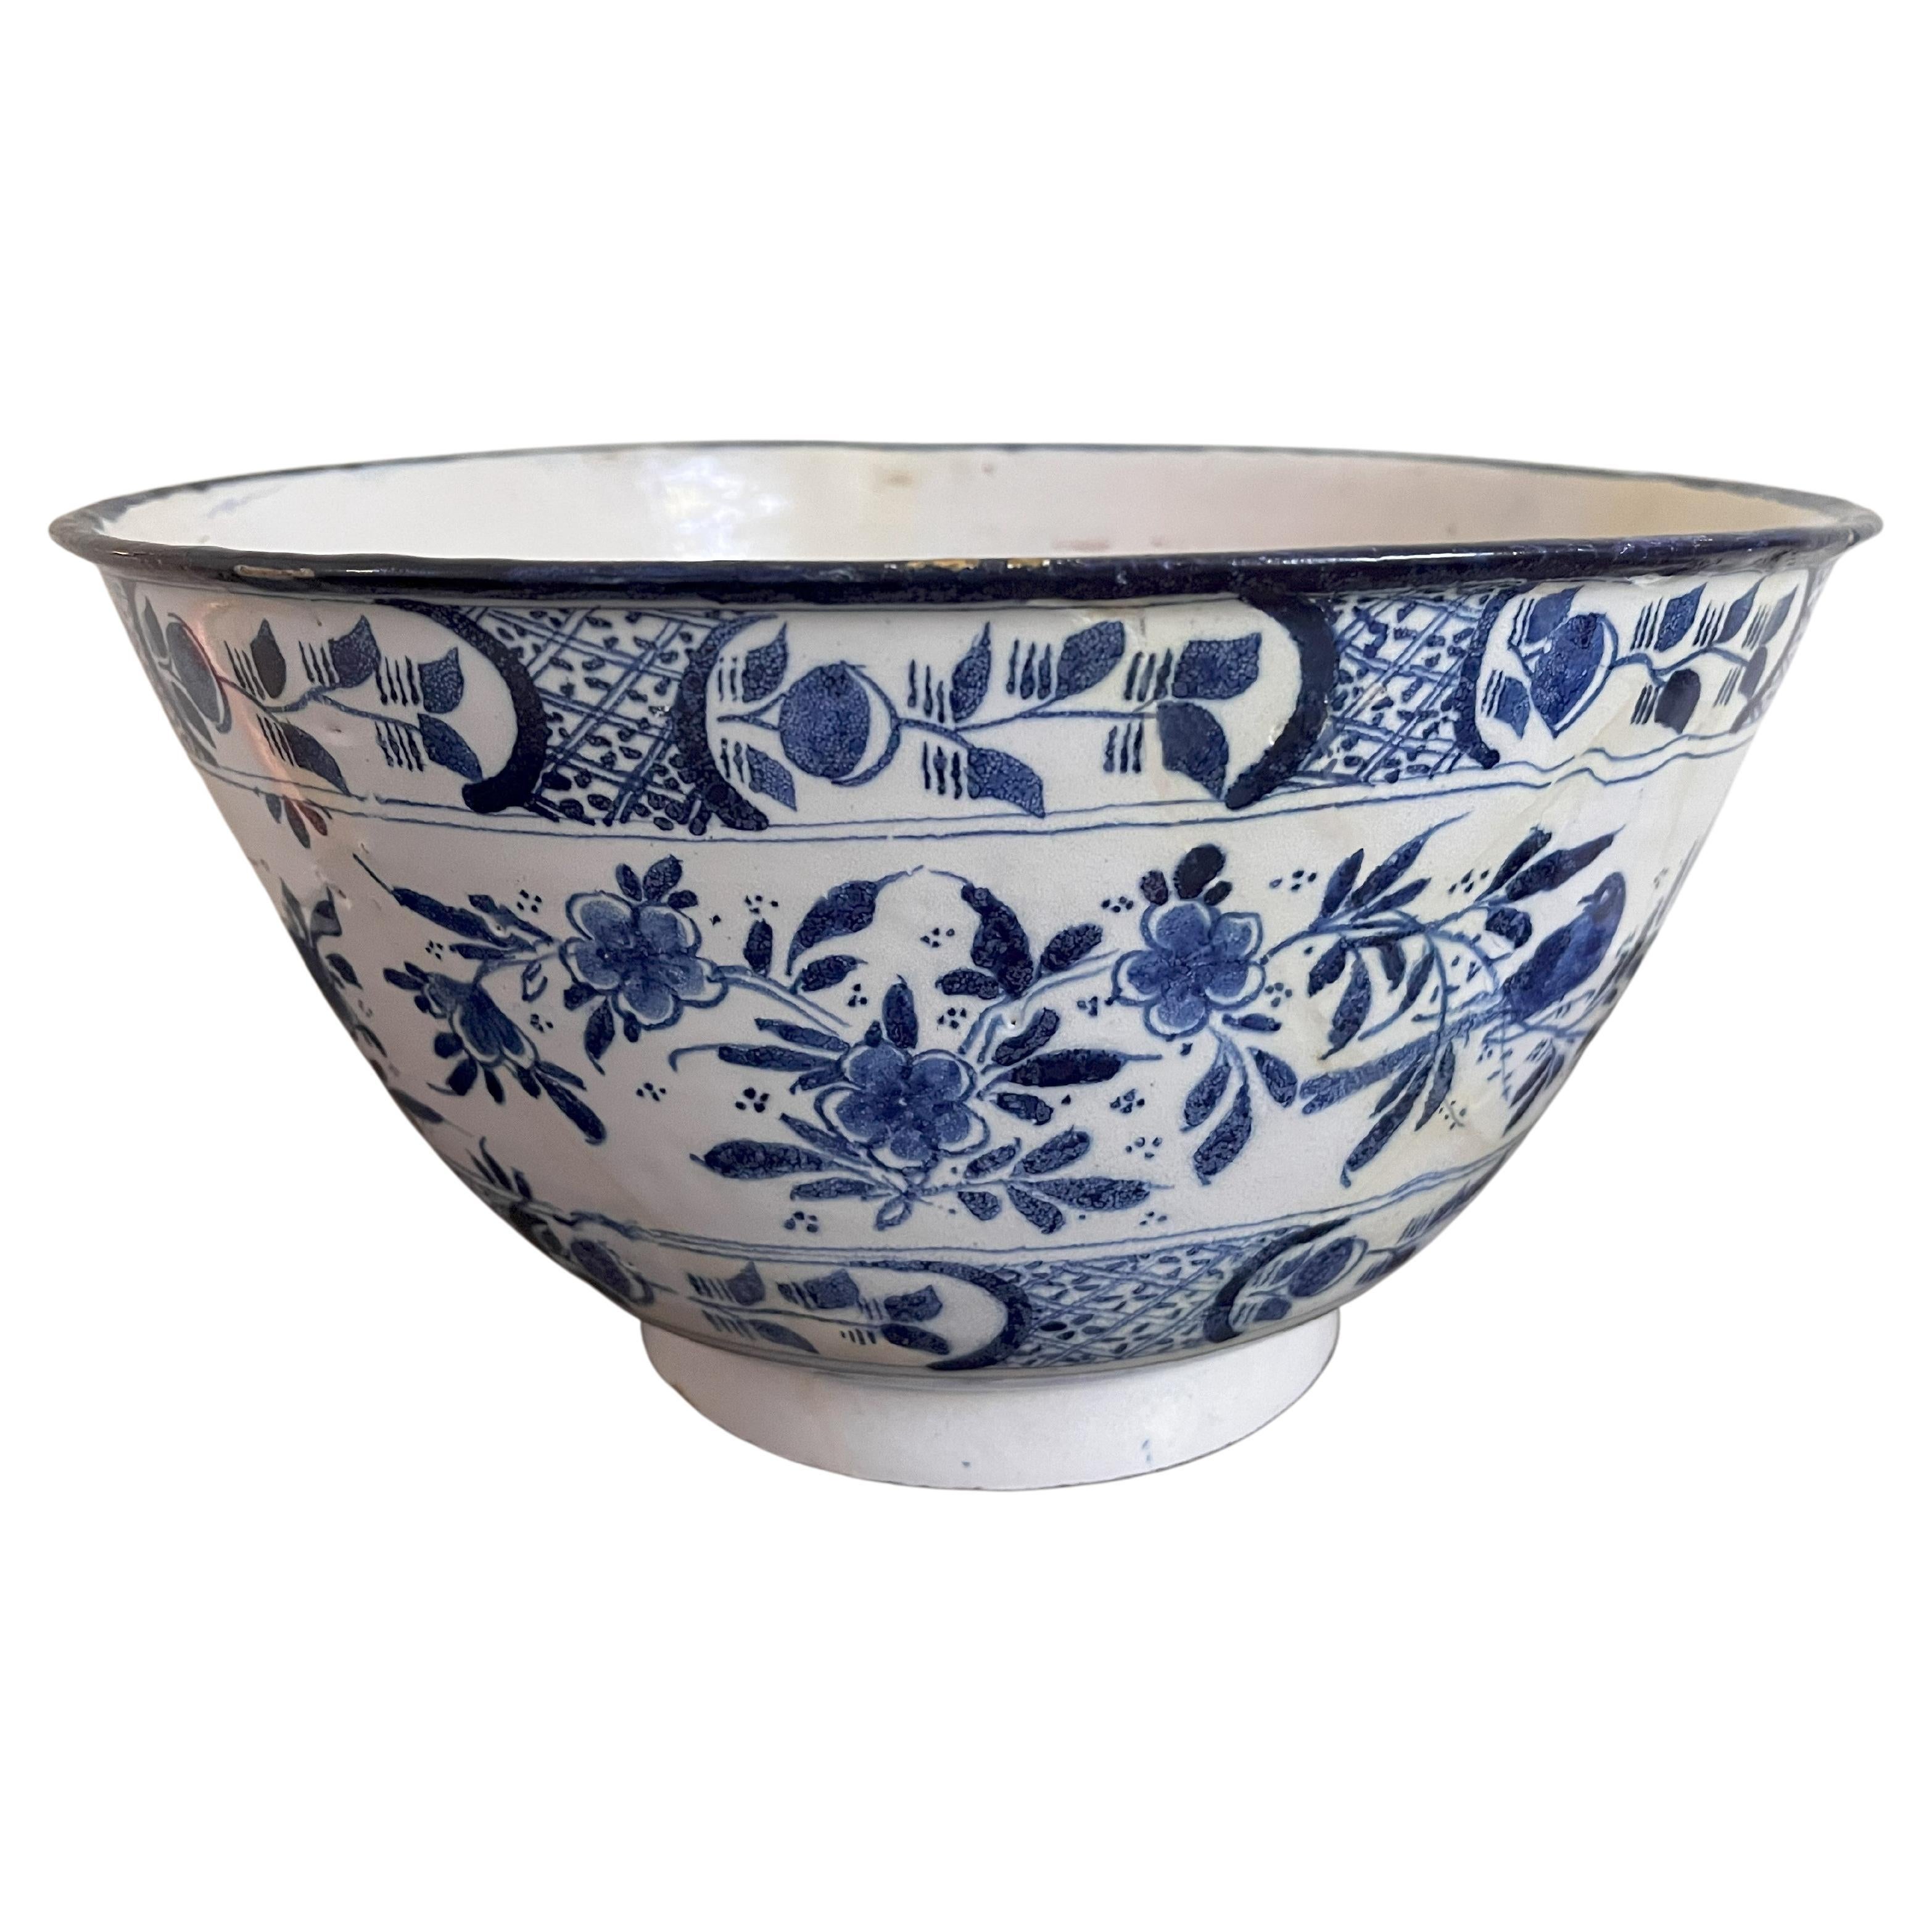 Large London Delft Blue And White Punch Bowl, Named & Dated 1727